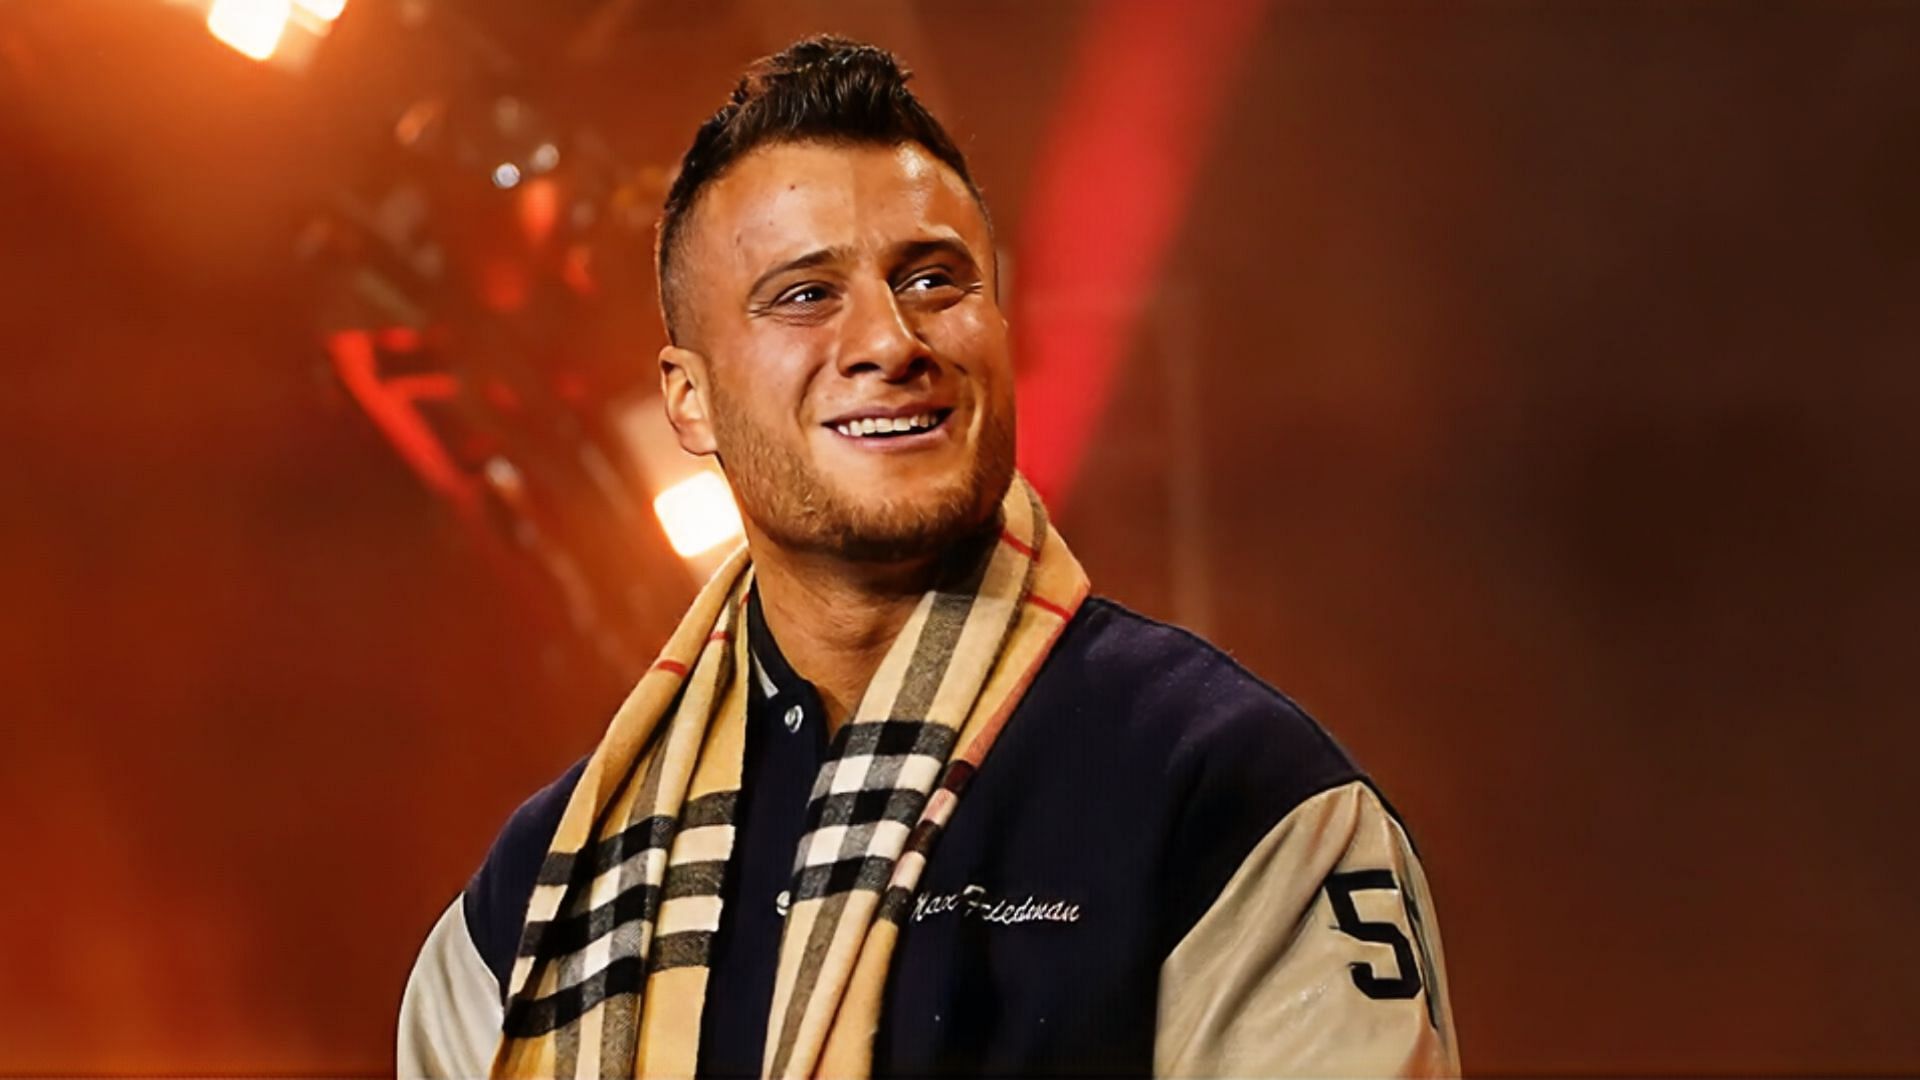 MJF is the longest-reigning AEW World Champion in history